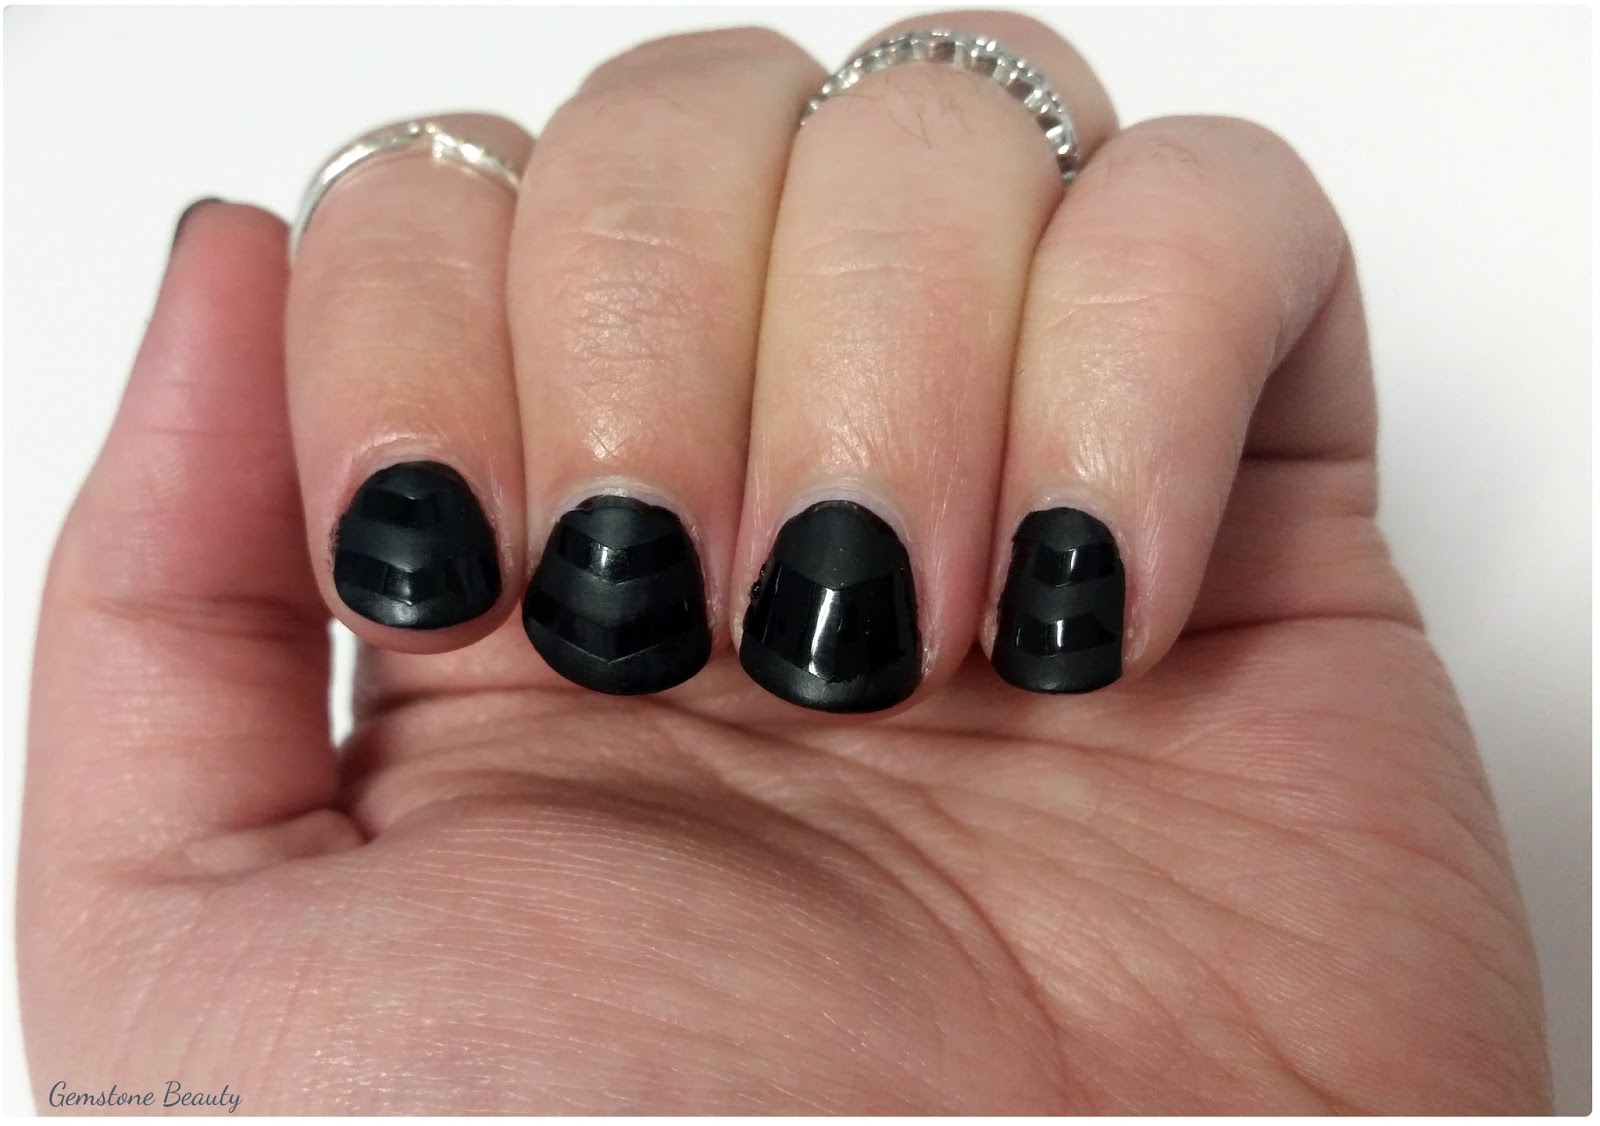 2. "Trendy Nail Shades for October" - wide 9